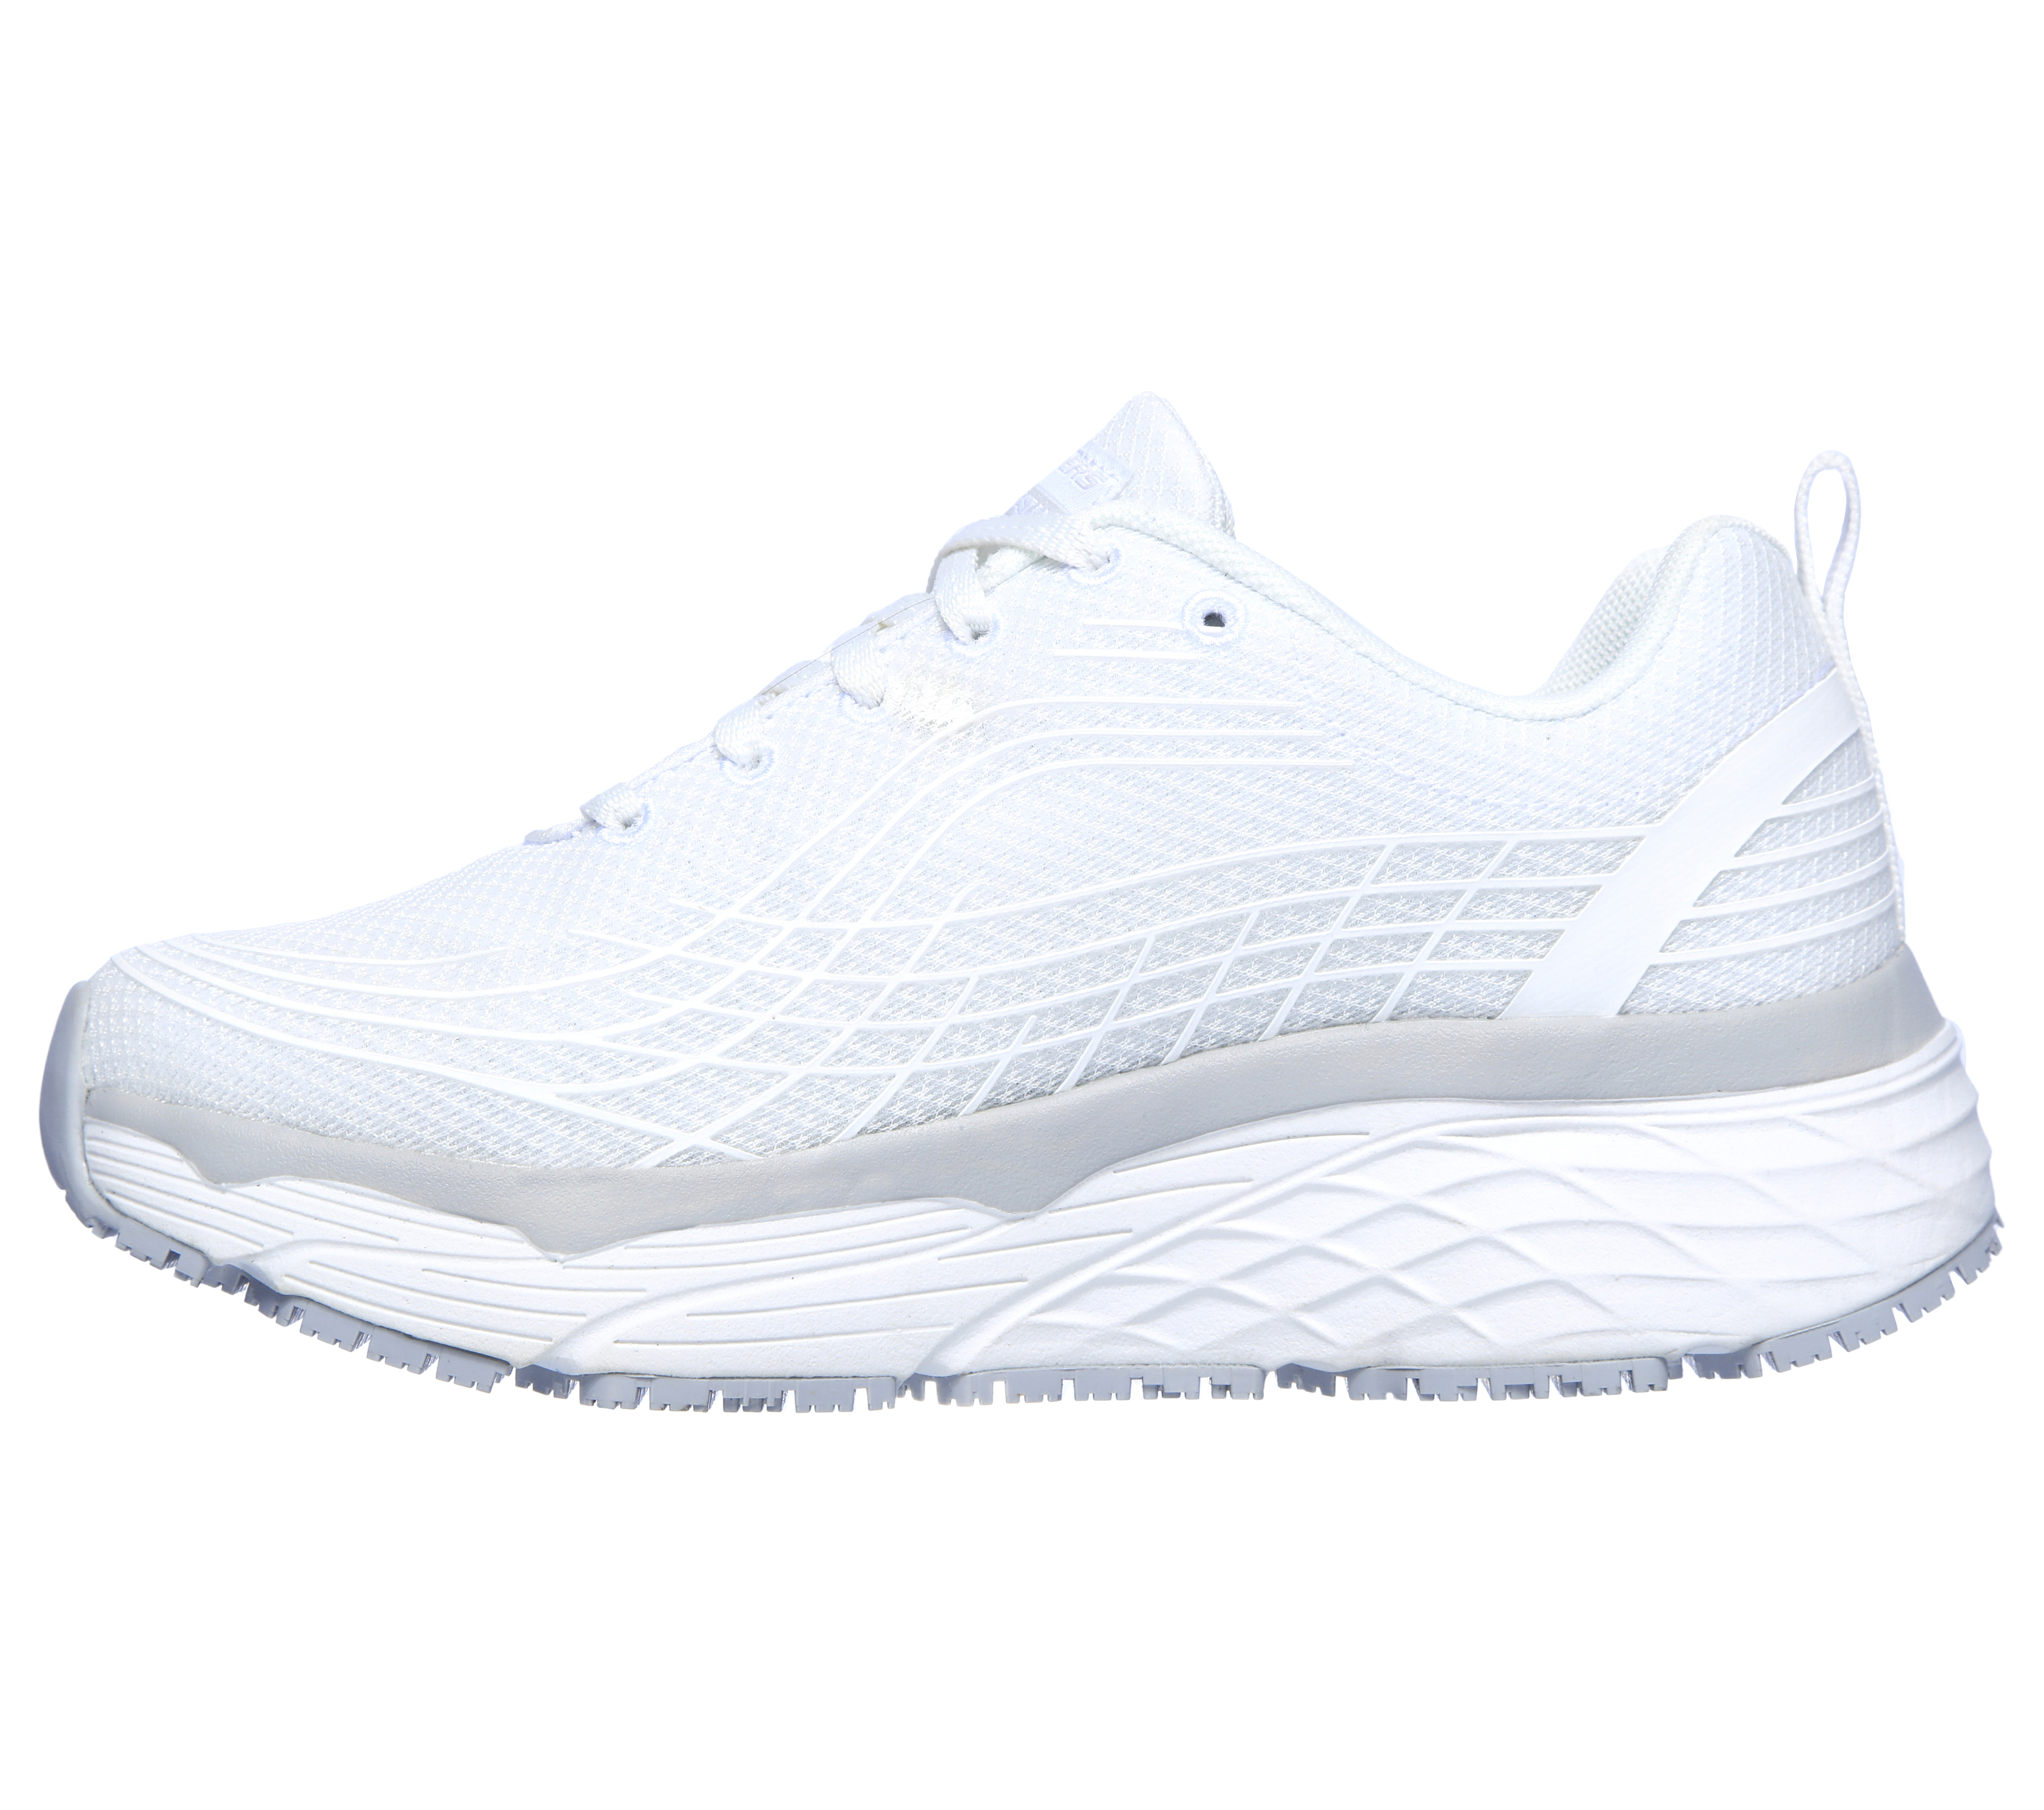 Work Relaxed Fit: Max Cushioning SR SKECHERS Elite 